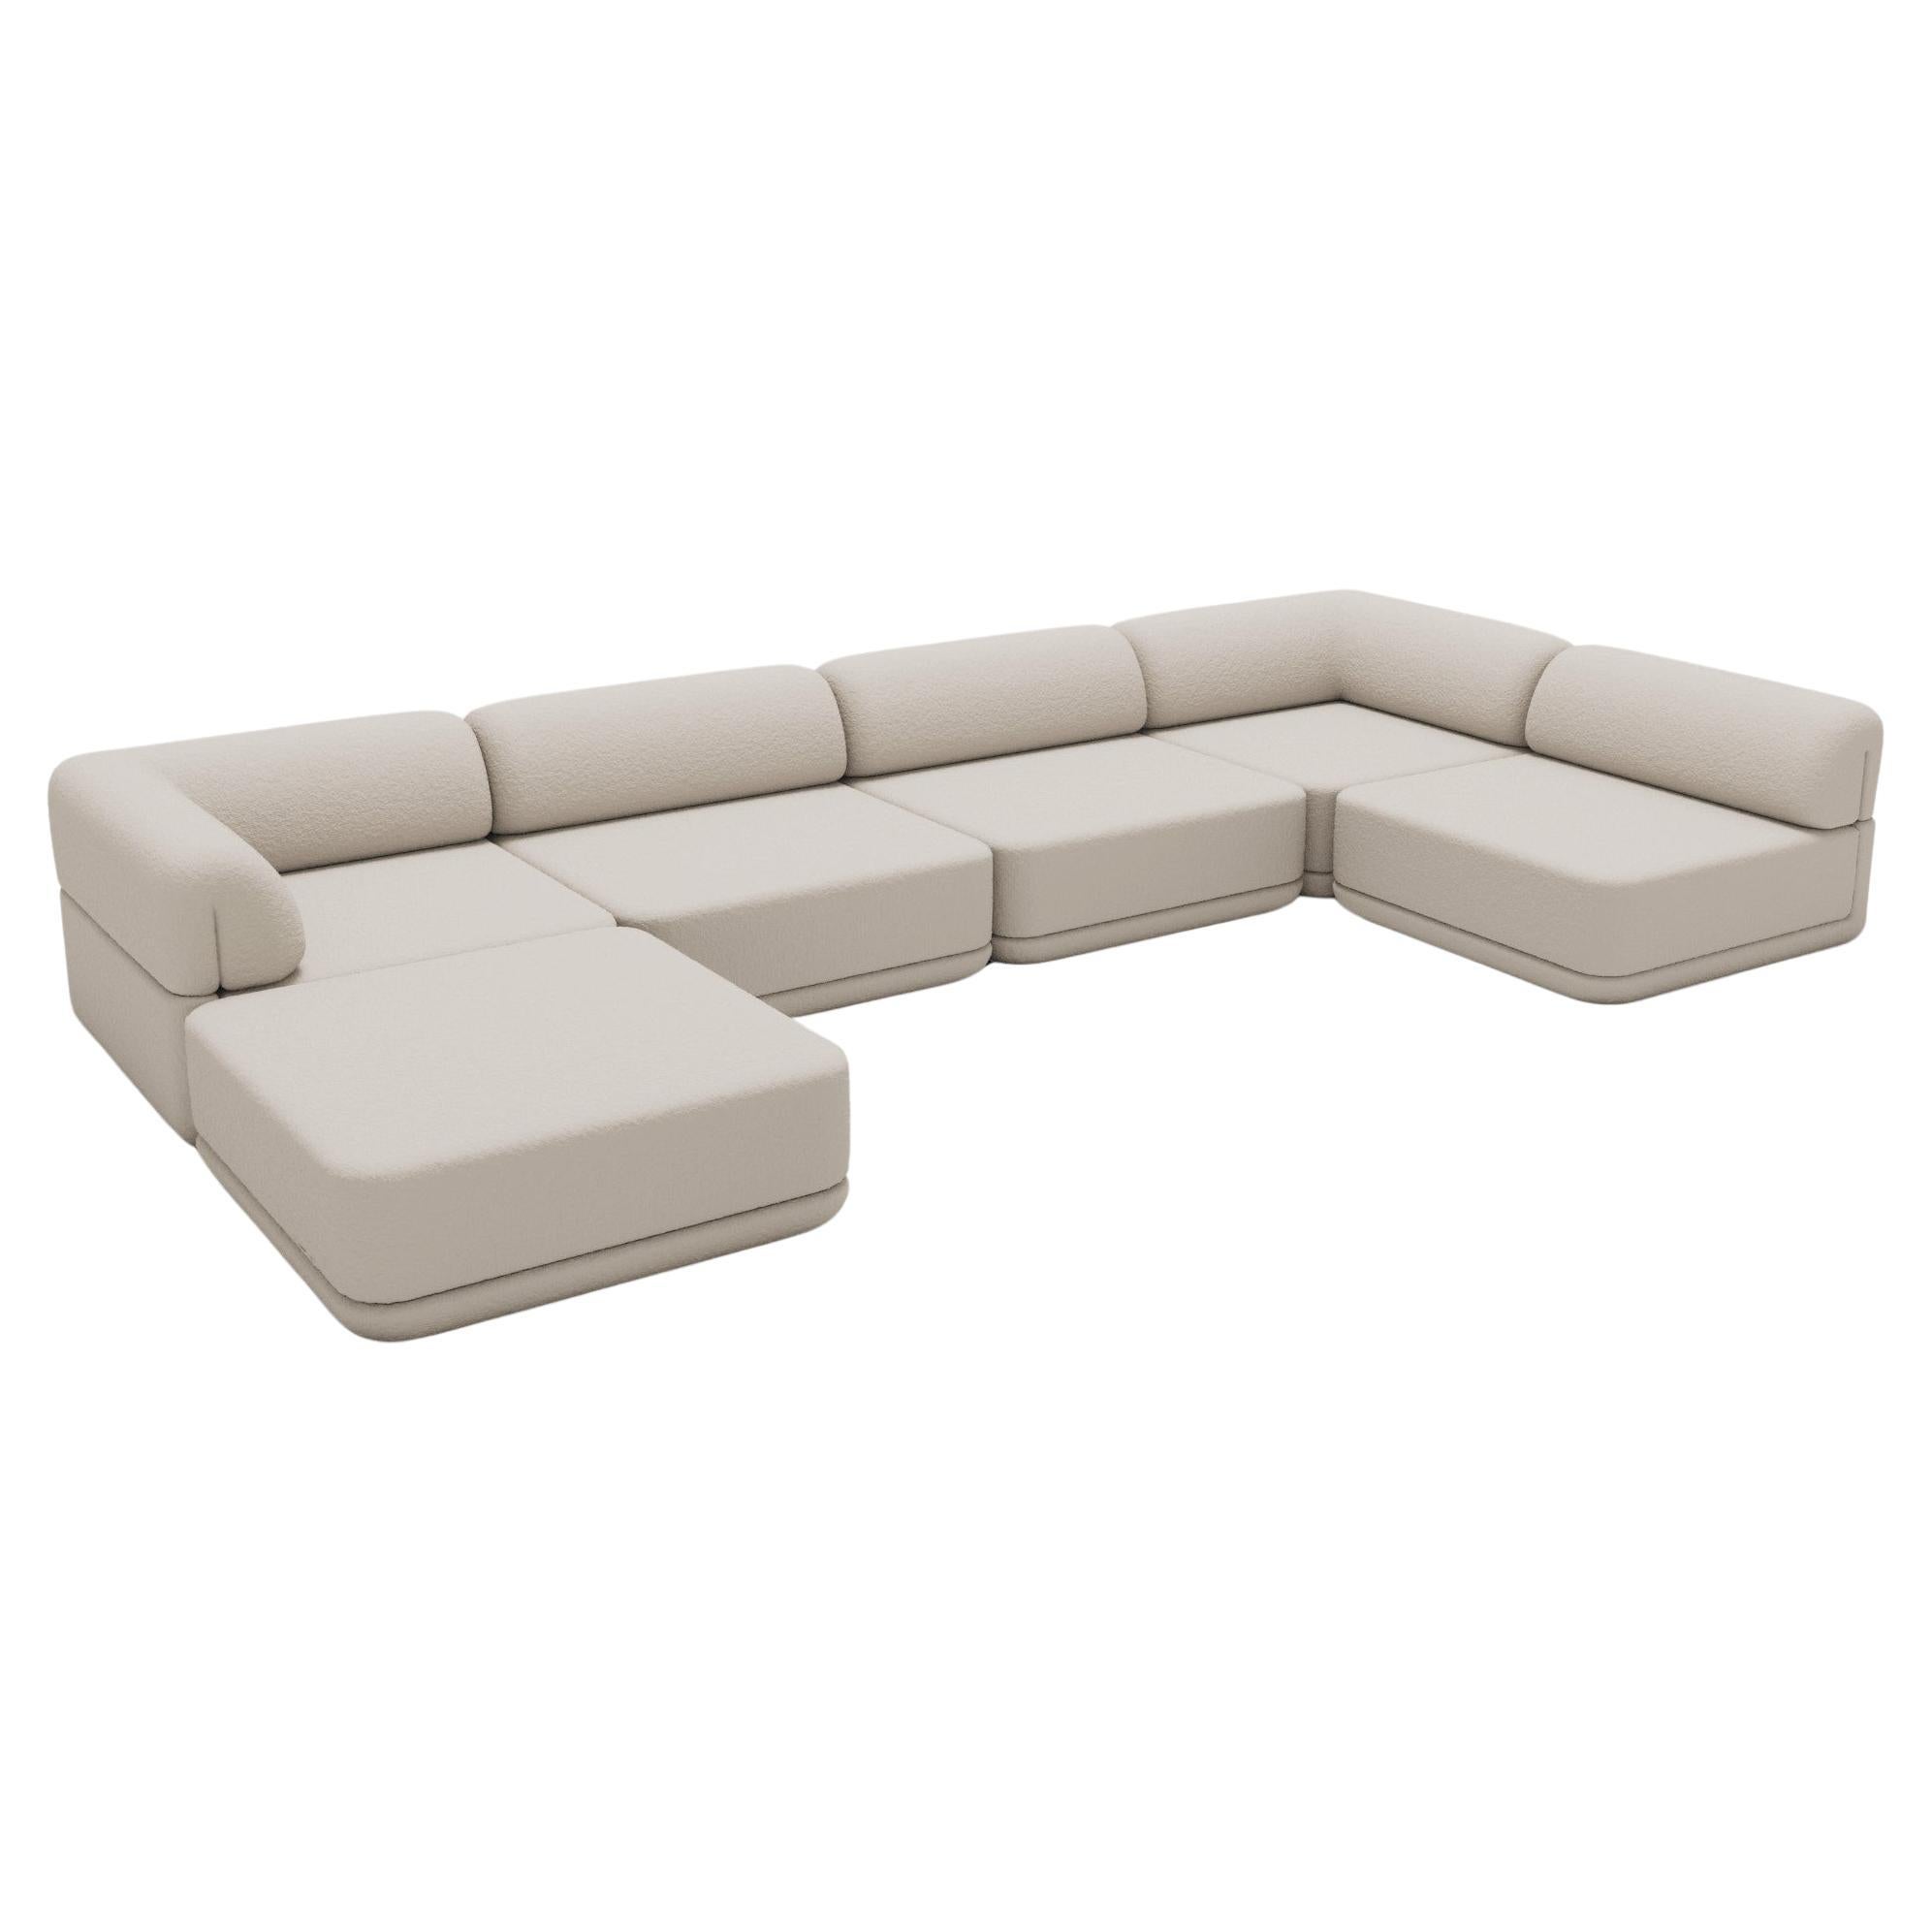 The Cube Sofa - Low Lounge Sectional